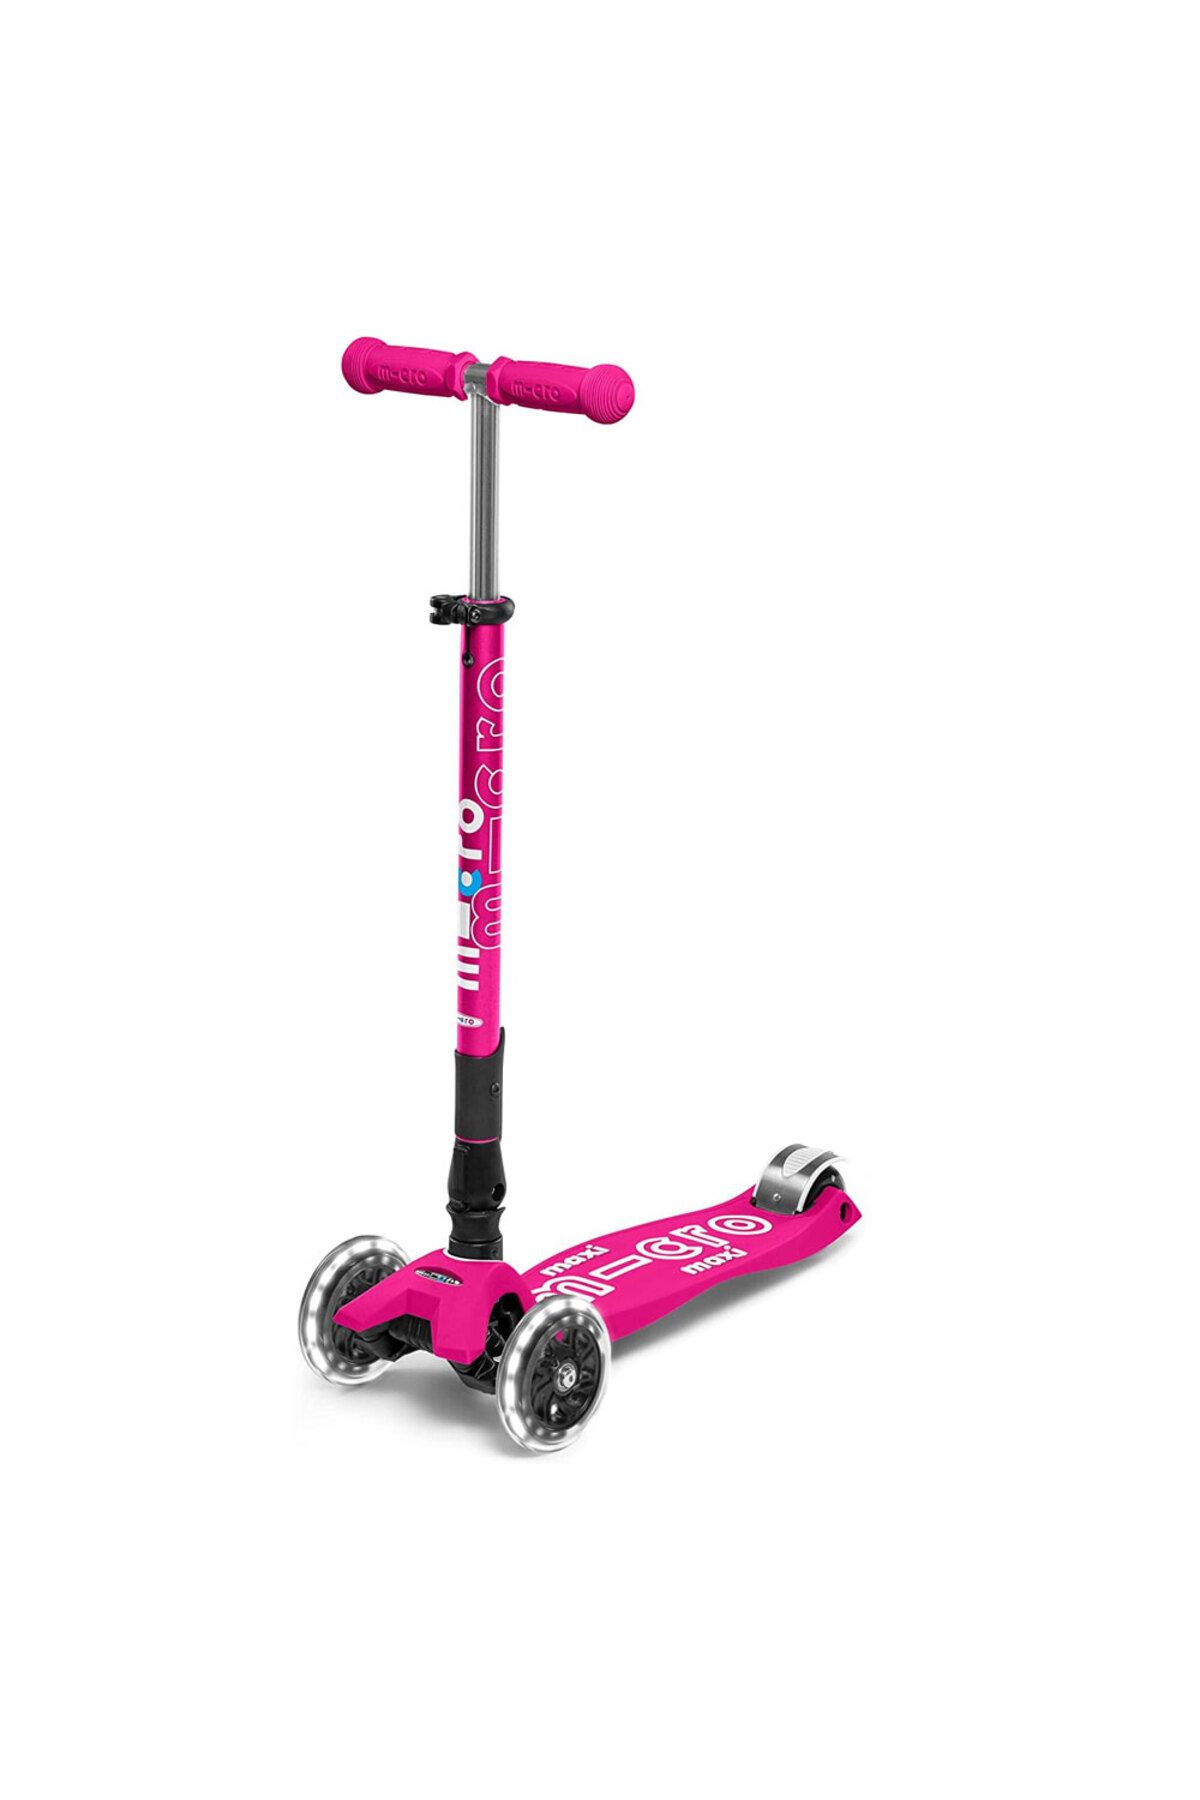 Micro Scooter Maxi Deluxe Shocking Pink Led Katlanabilir Mmd096